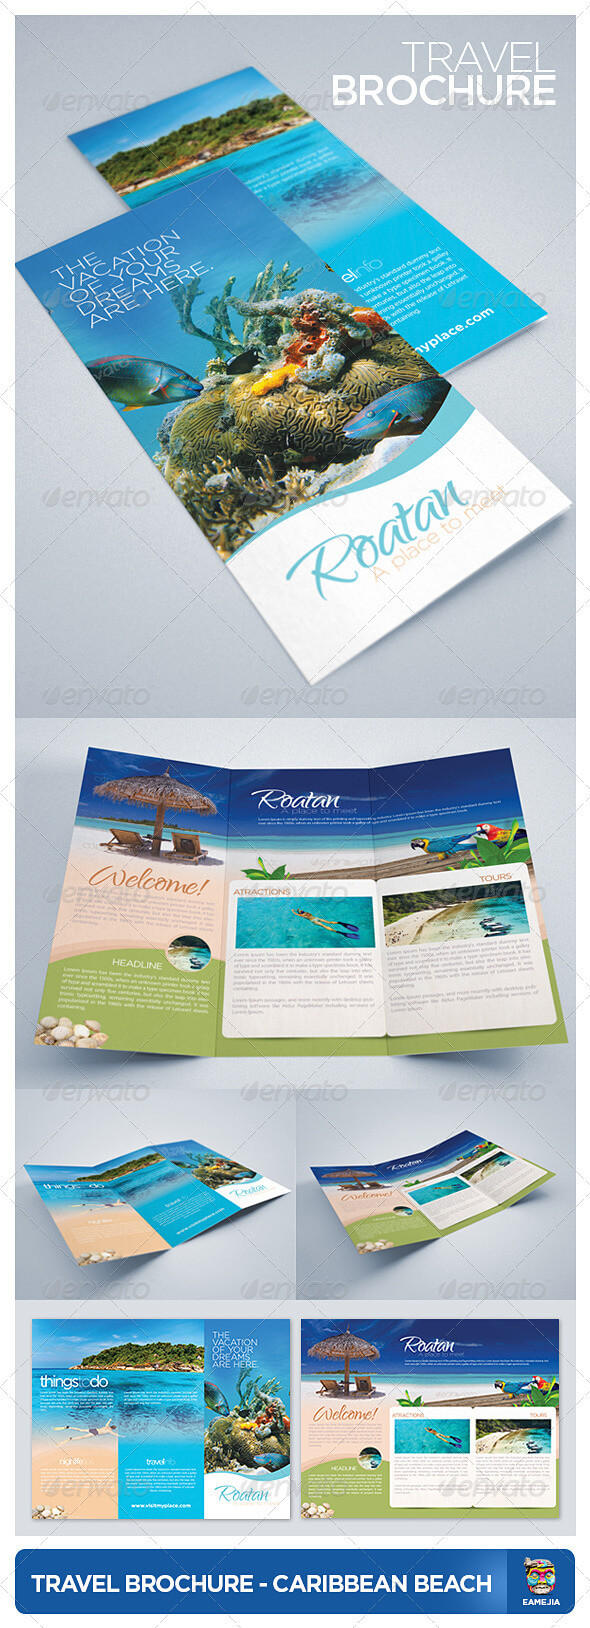 Island Graphics, Designs & Templates From Graphicriver Within Island Brochure Template